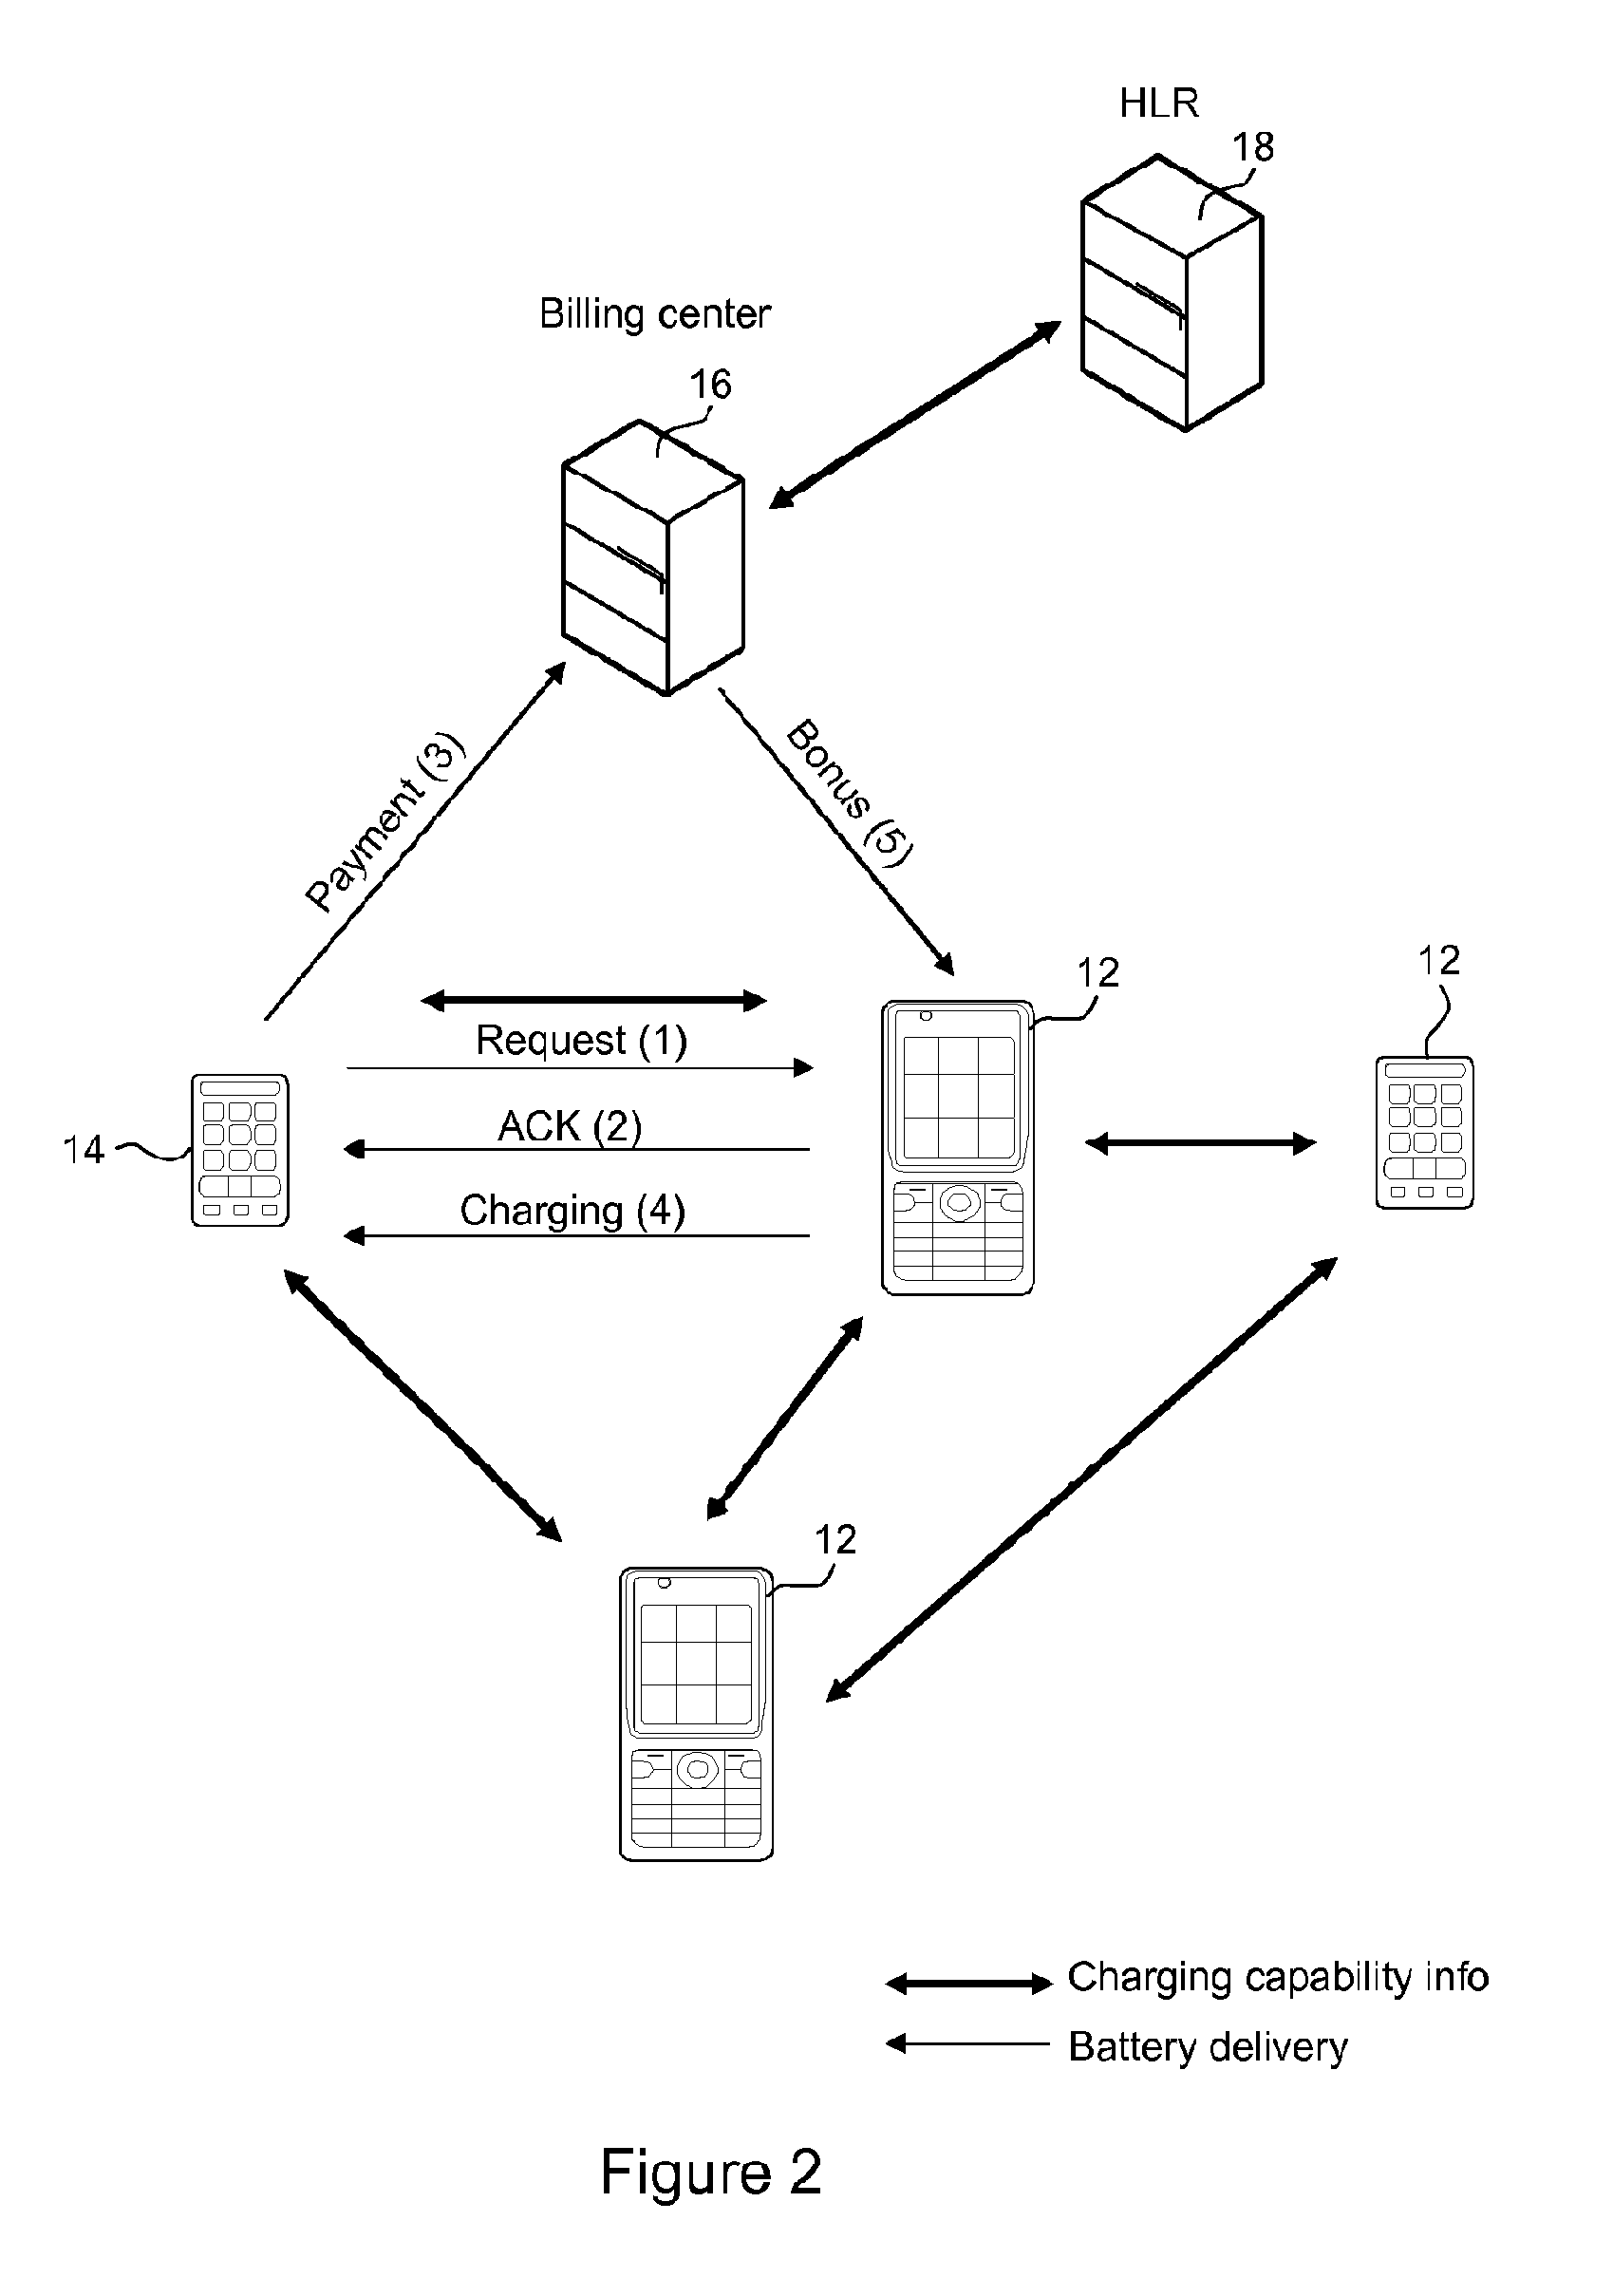 Charging of battery-operated devices over wireless connections